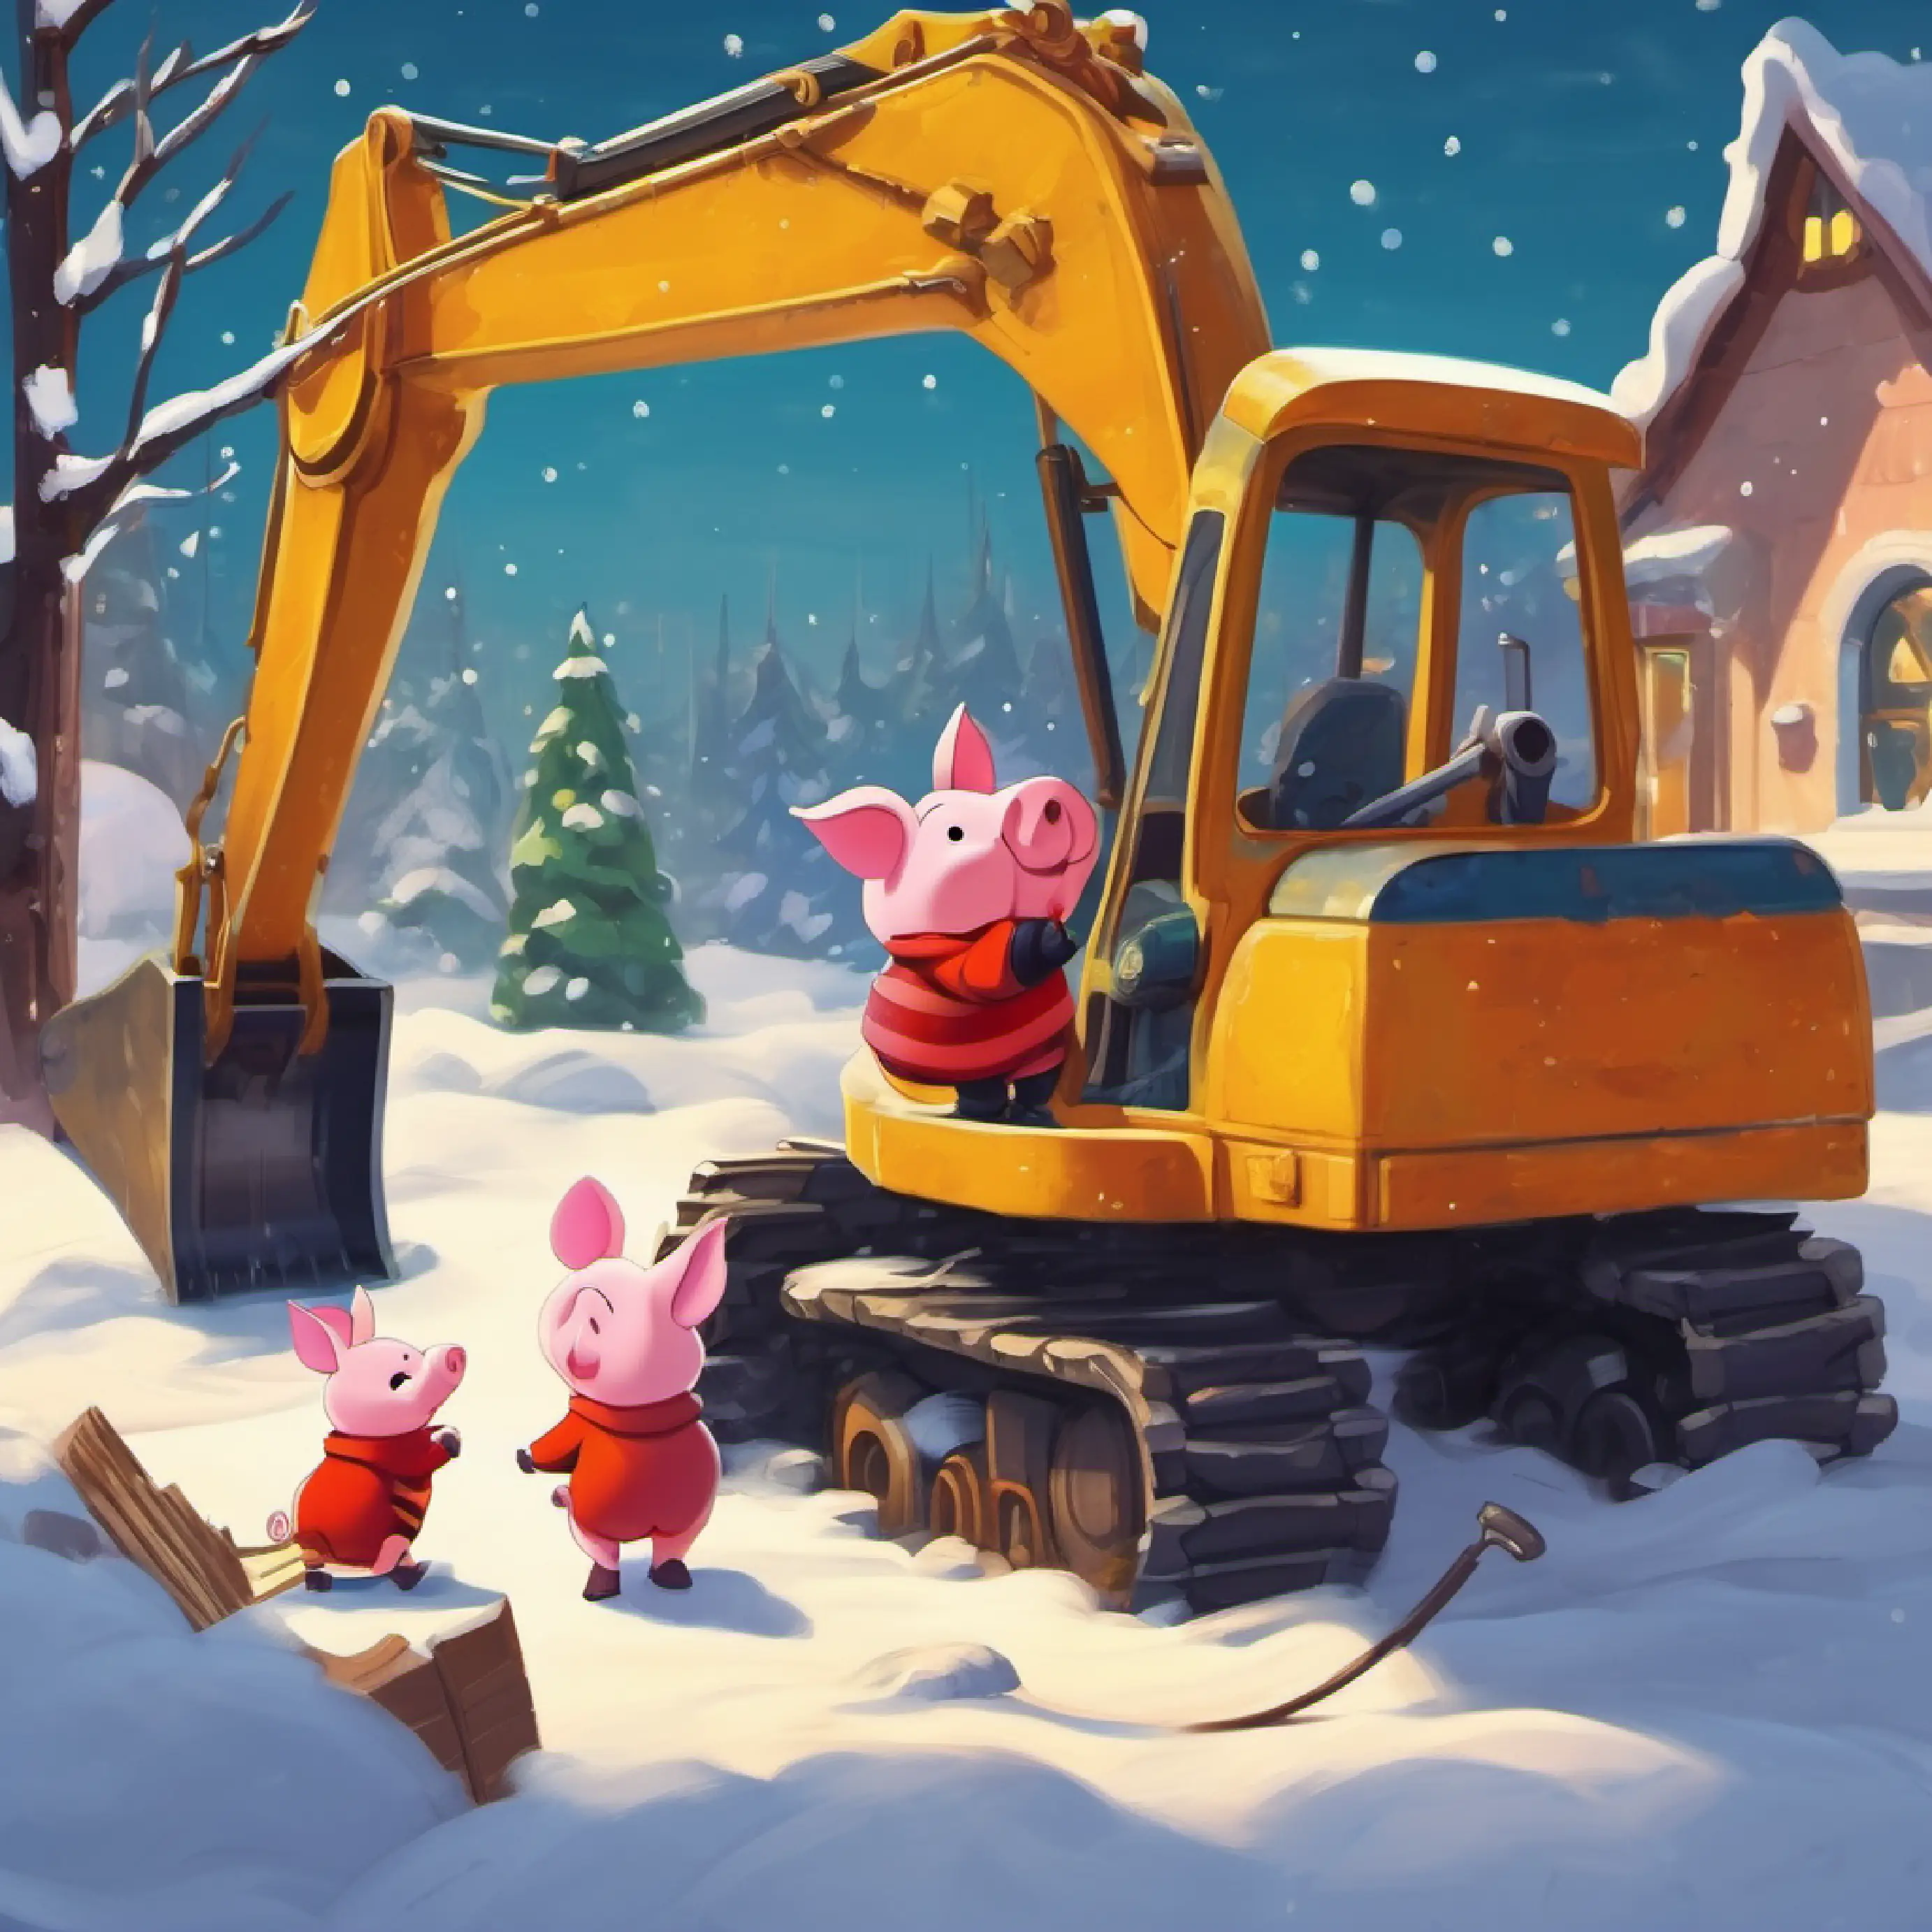 Piglet and Excavator find Mechanic who fixes things.